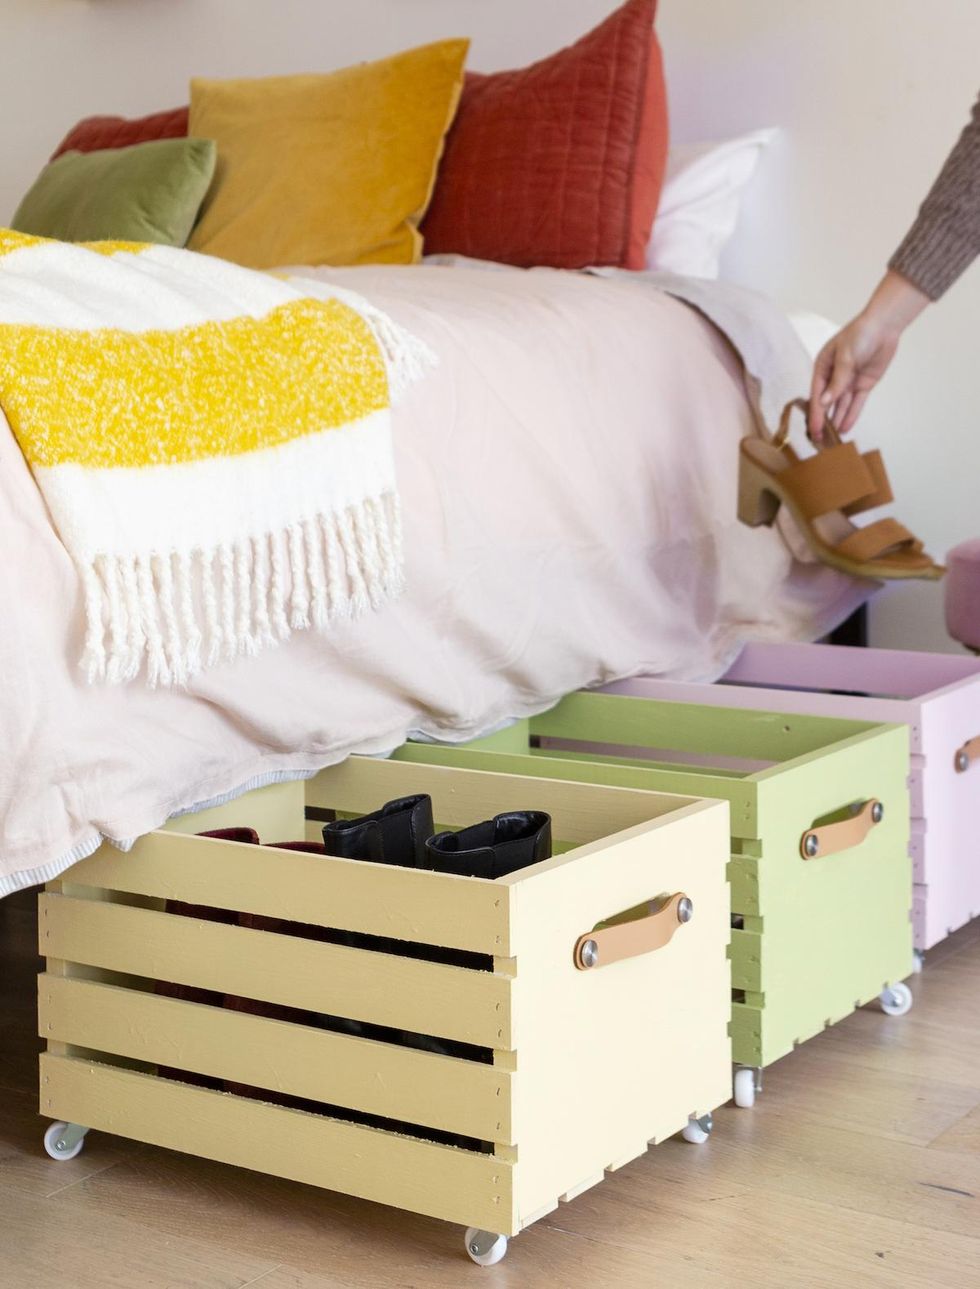 Maximize Your Bedroom Space with Creative Clothing Storage